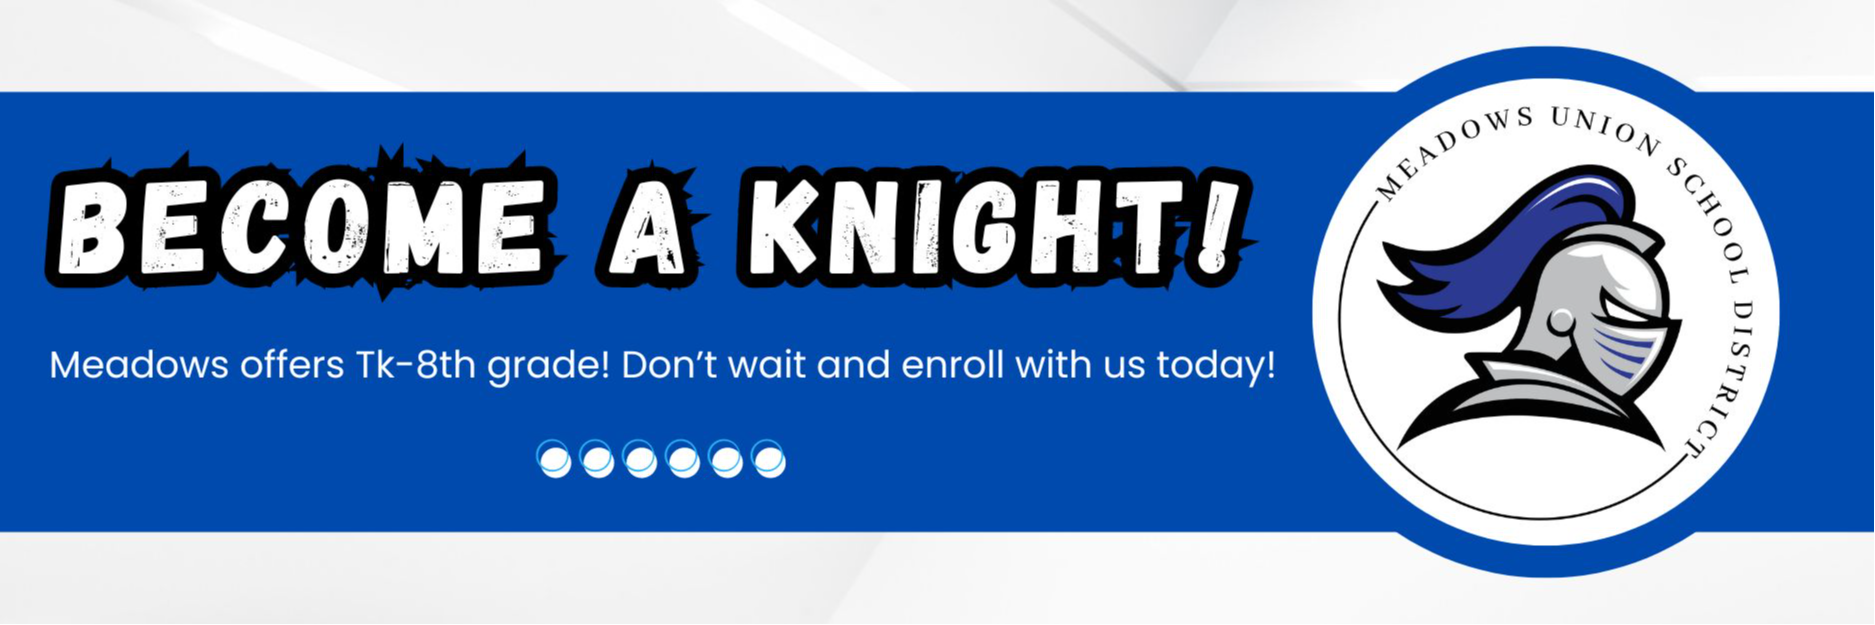 Become a Knight